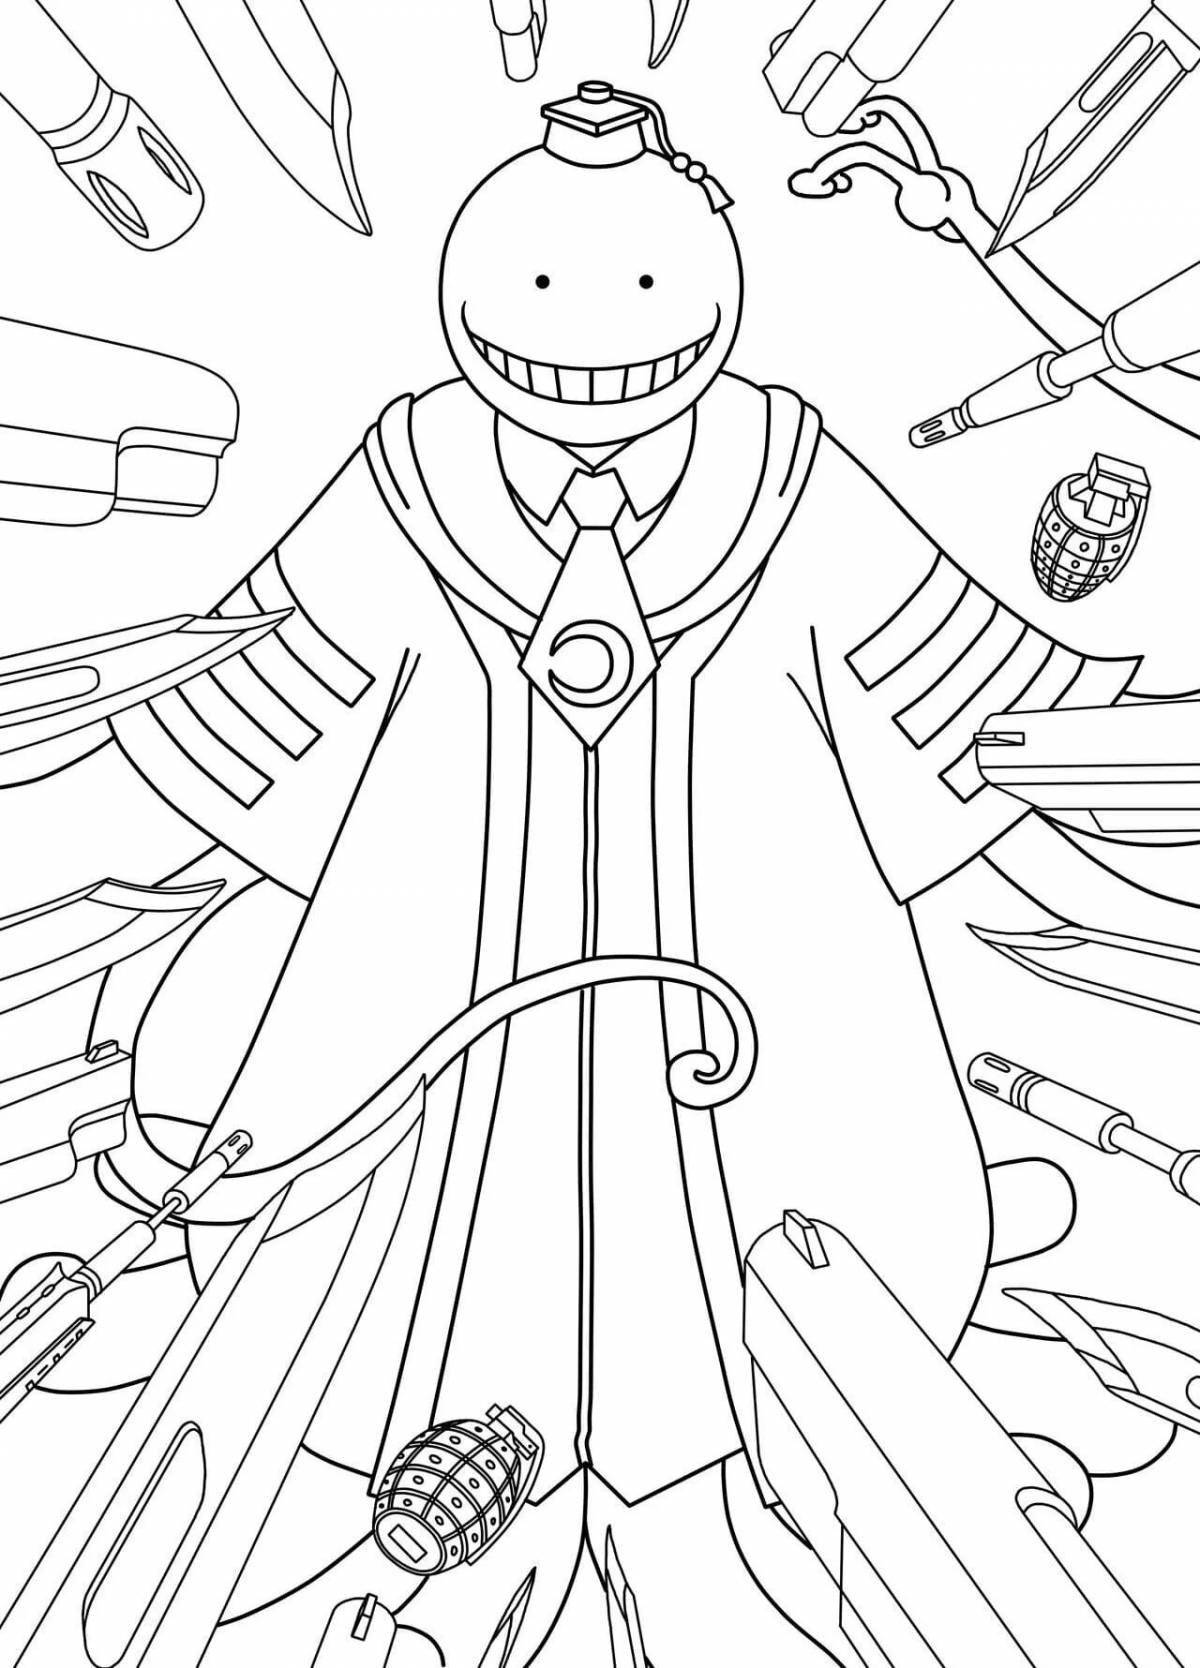 Exquisite class assassin anime coloring page